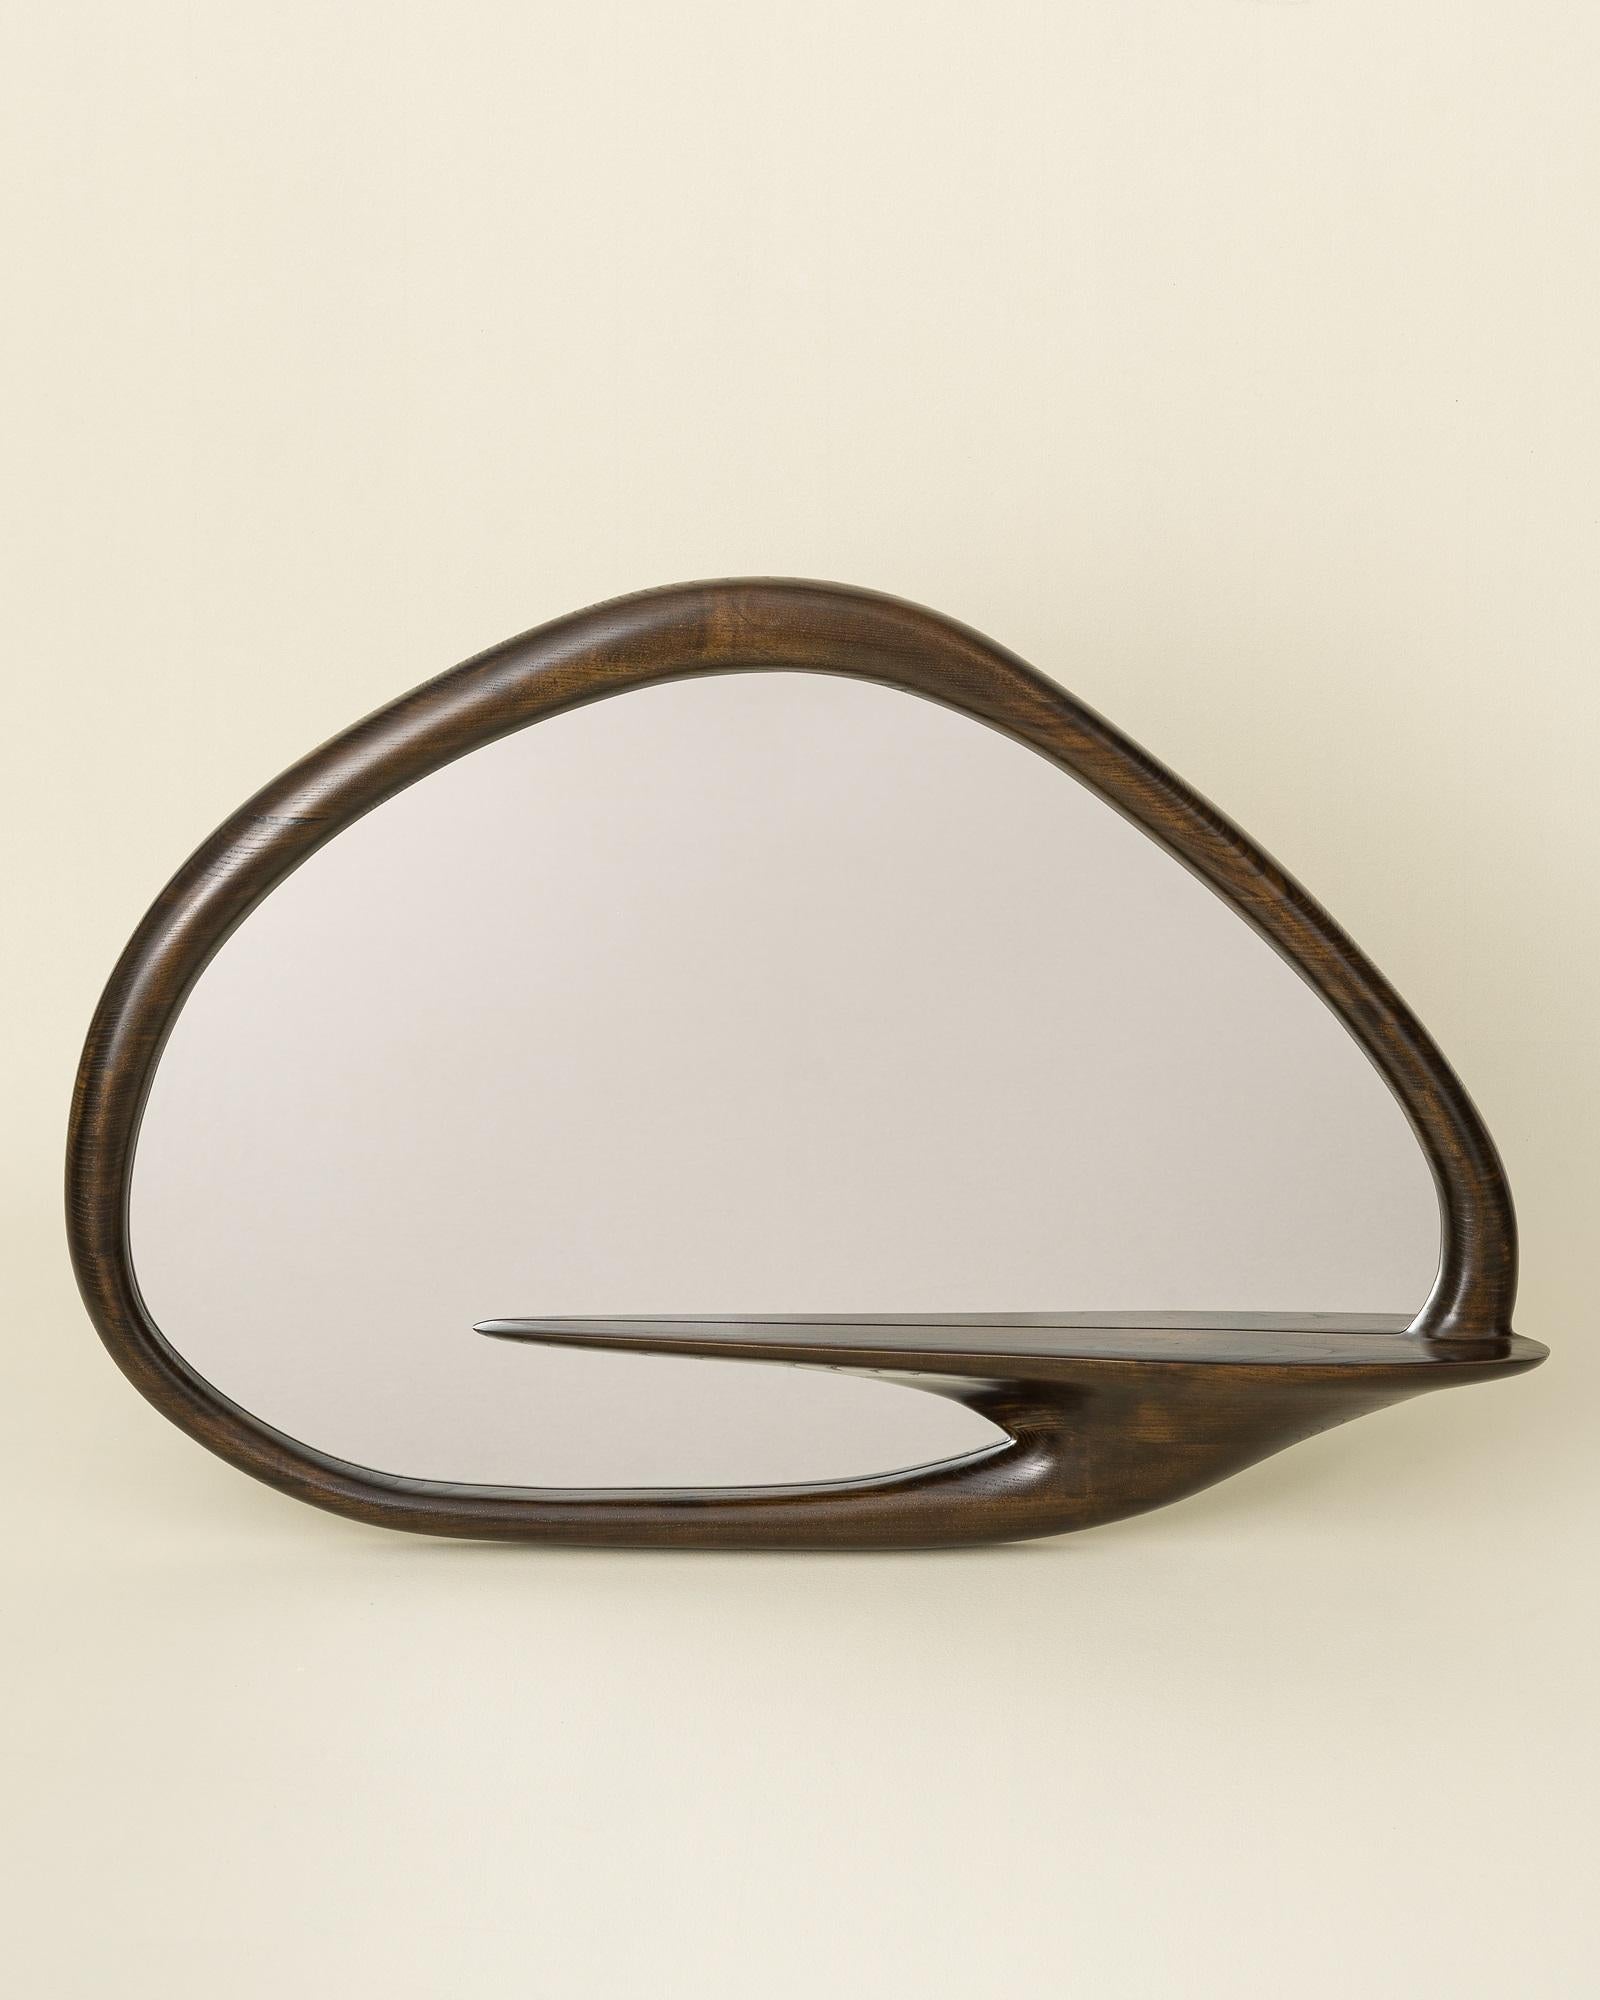 Mirror With Shelf by Tomasz Omachel
Dimensions: D 17 x W 110 x H 76 cm. 
Materials: Ash and glass.

Available in different wood options: oak, ash, and American walnut. Different finishes available: Lacquer/Oil and wood surface treatments: natural or